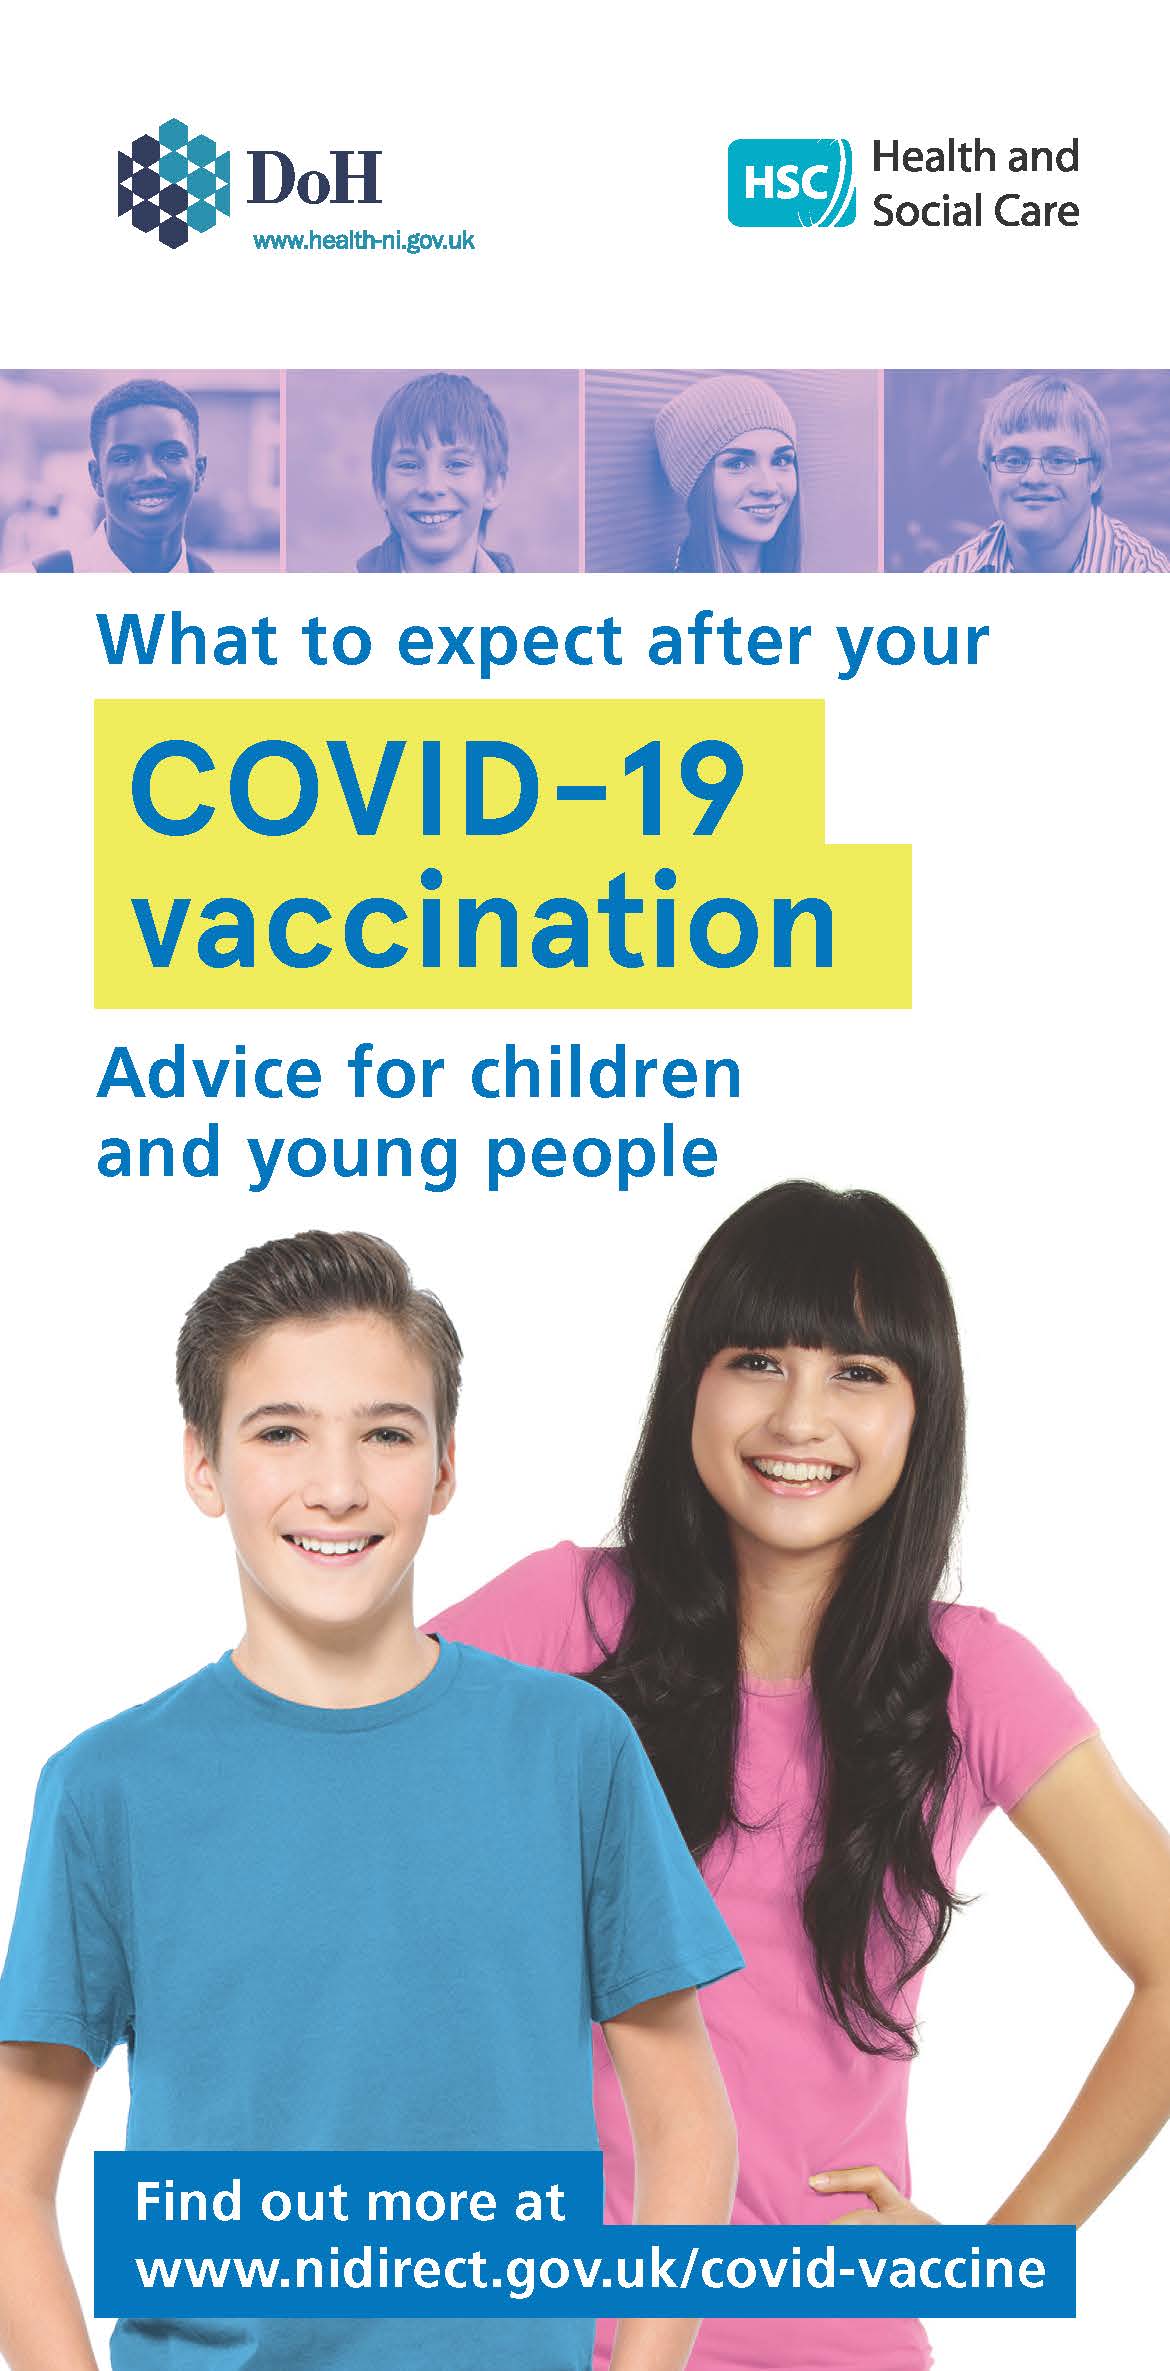 COVID vaccine info for children and young people image